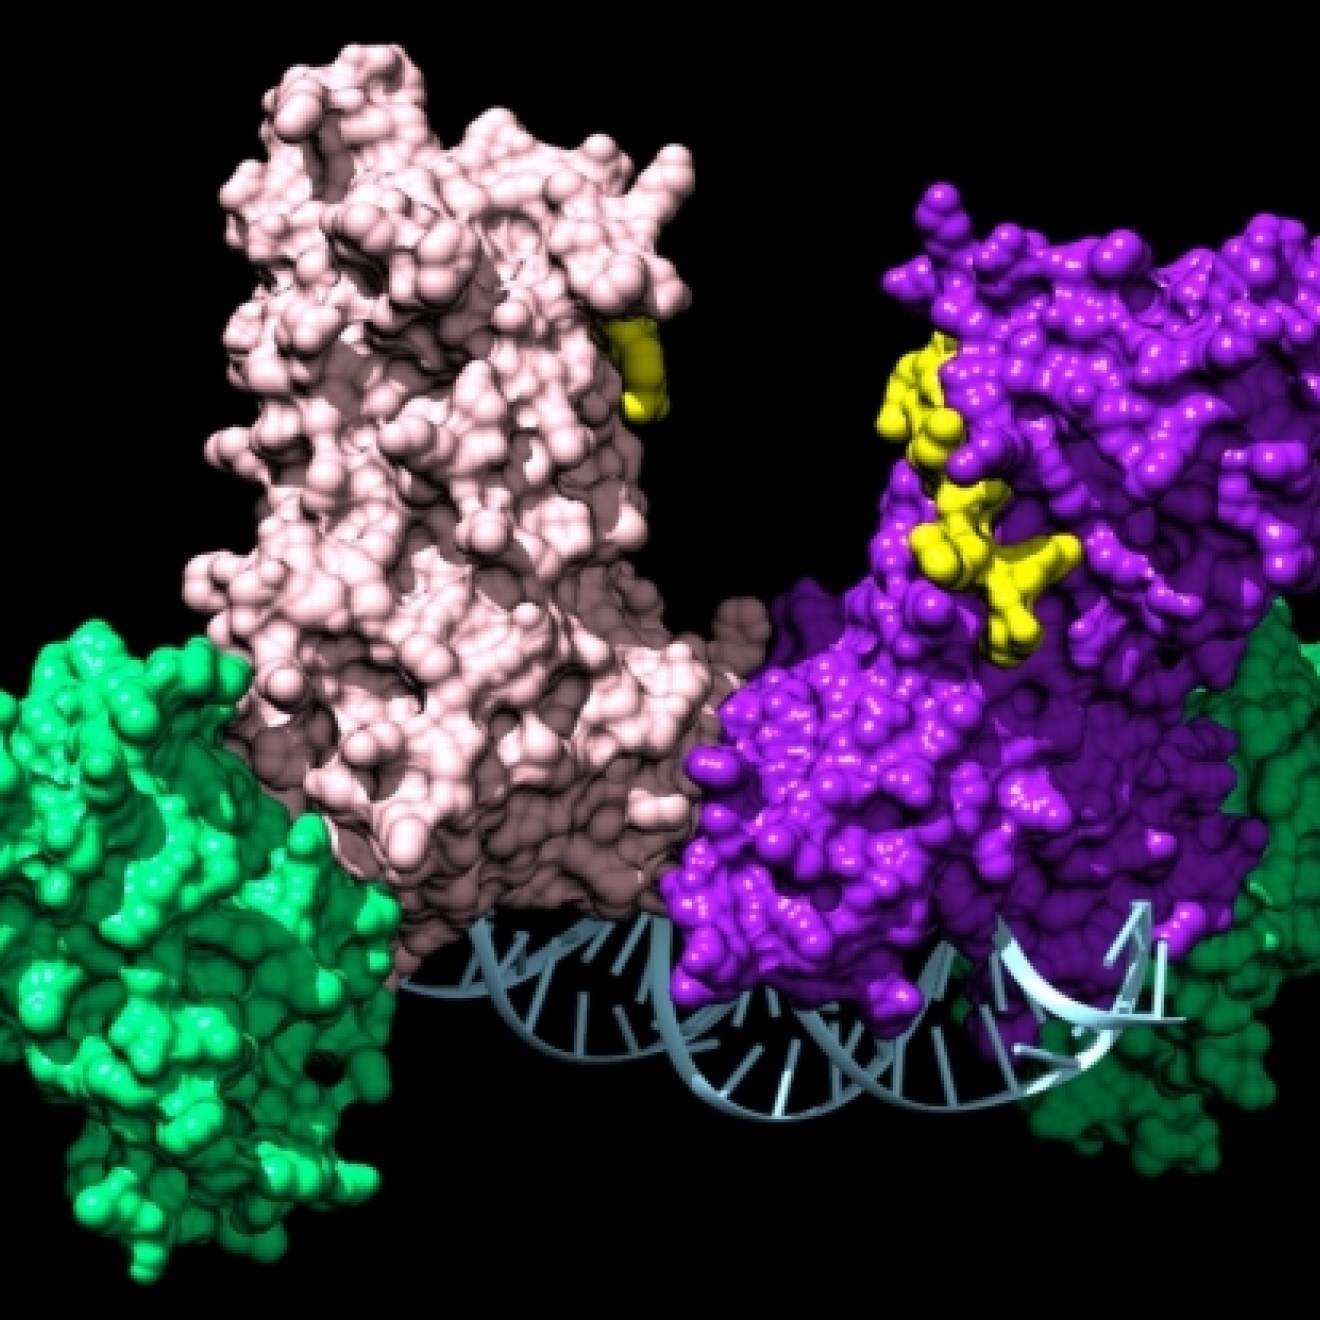 Illustration of a pair of DNMT3A enzymes joining two auxiliary proteins (green) to form a four-part complex